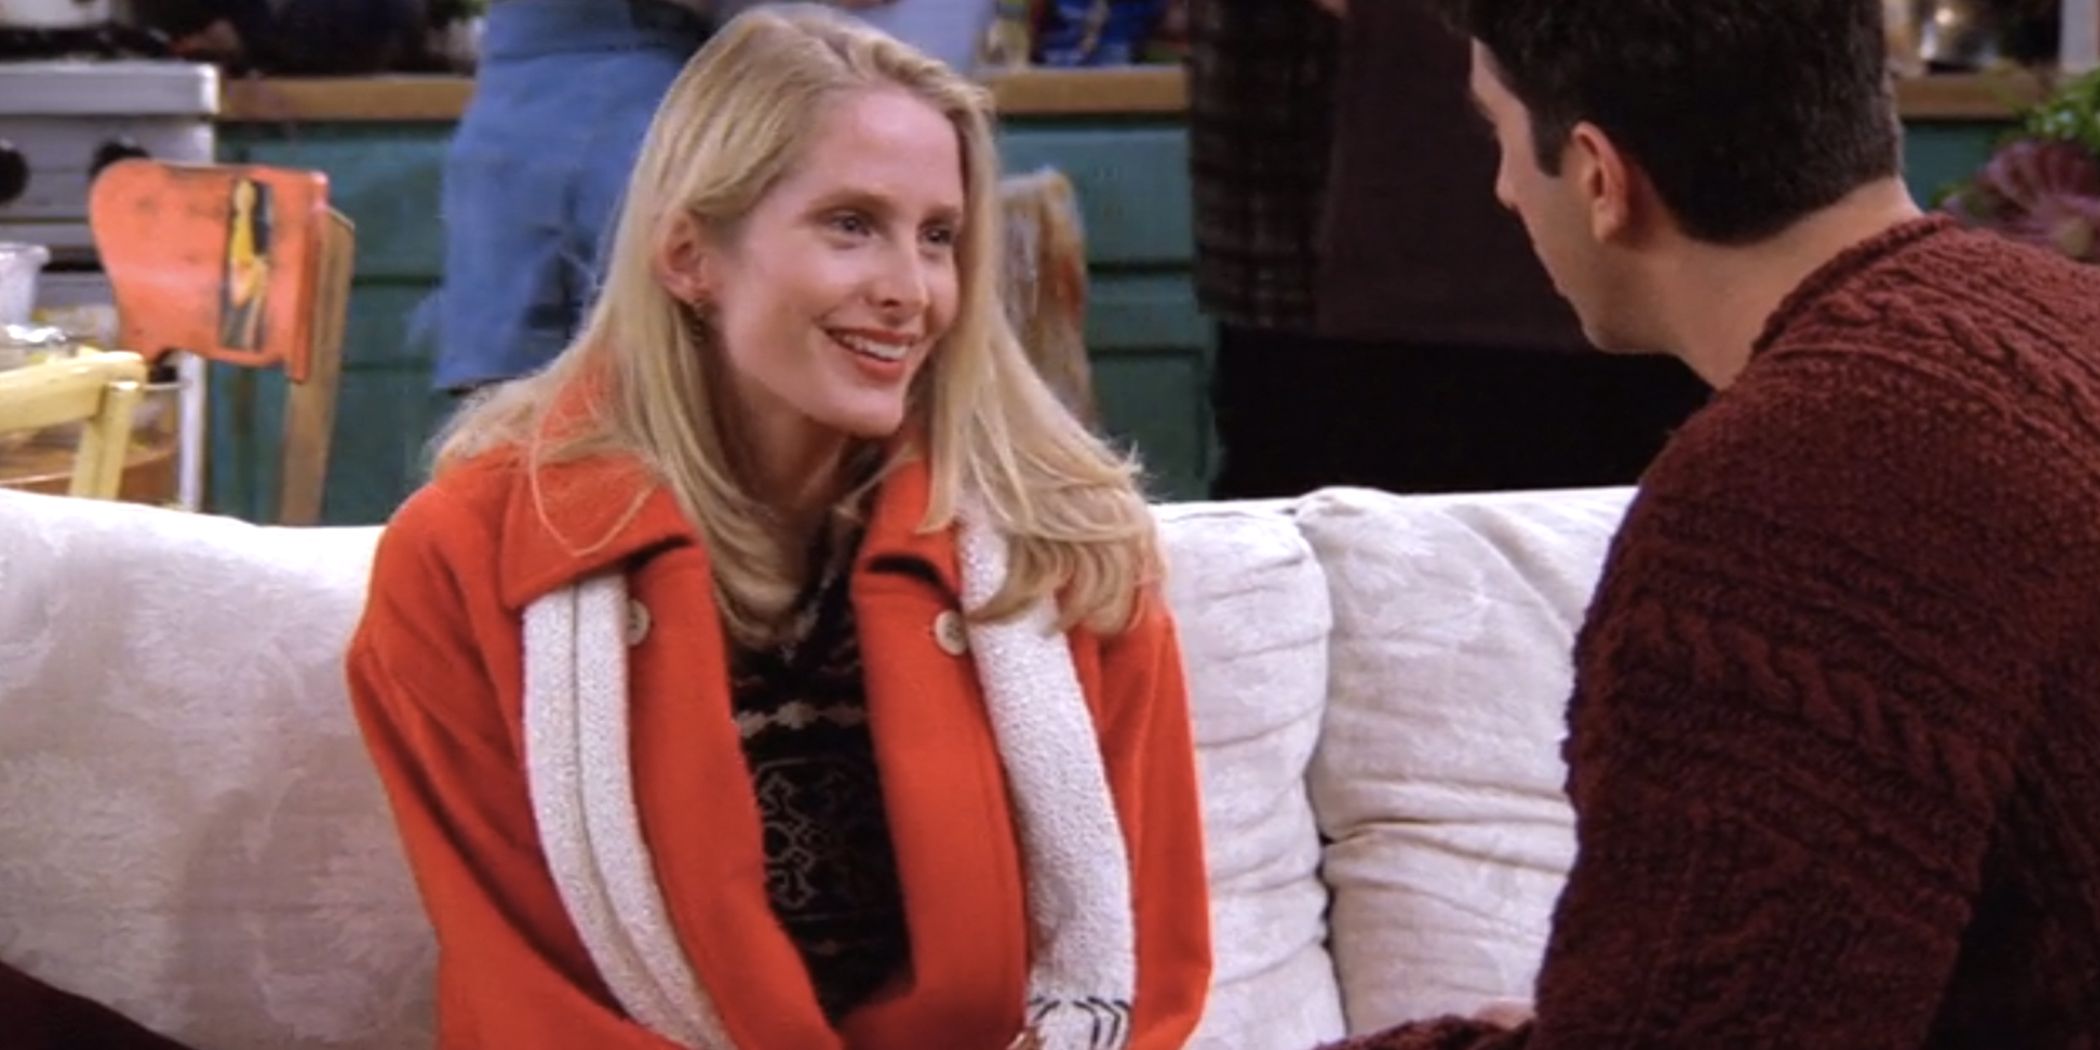 Carol talking to Ross at Monica's apartment in Friends